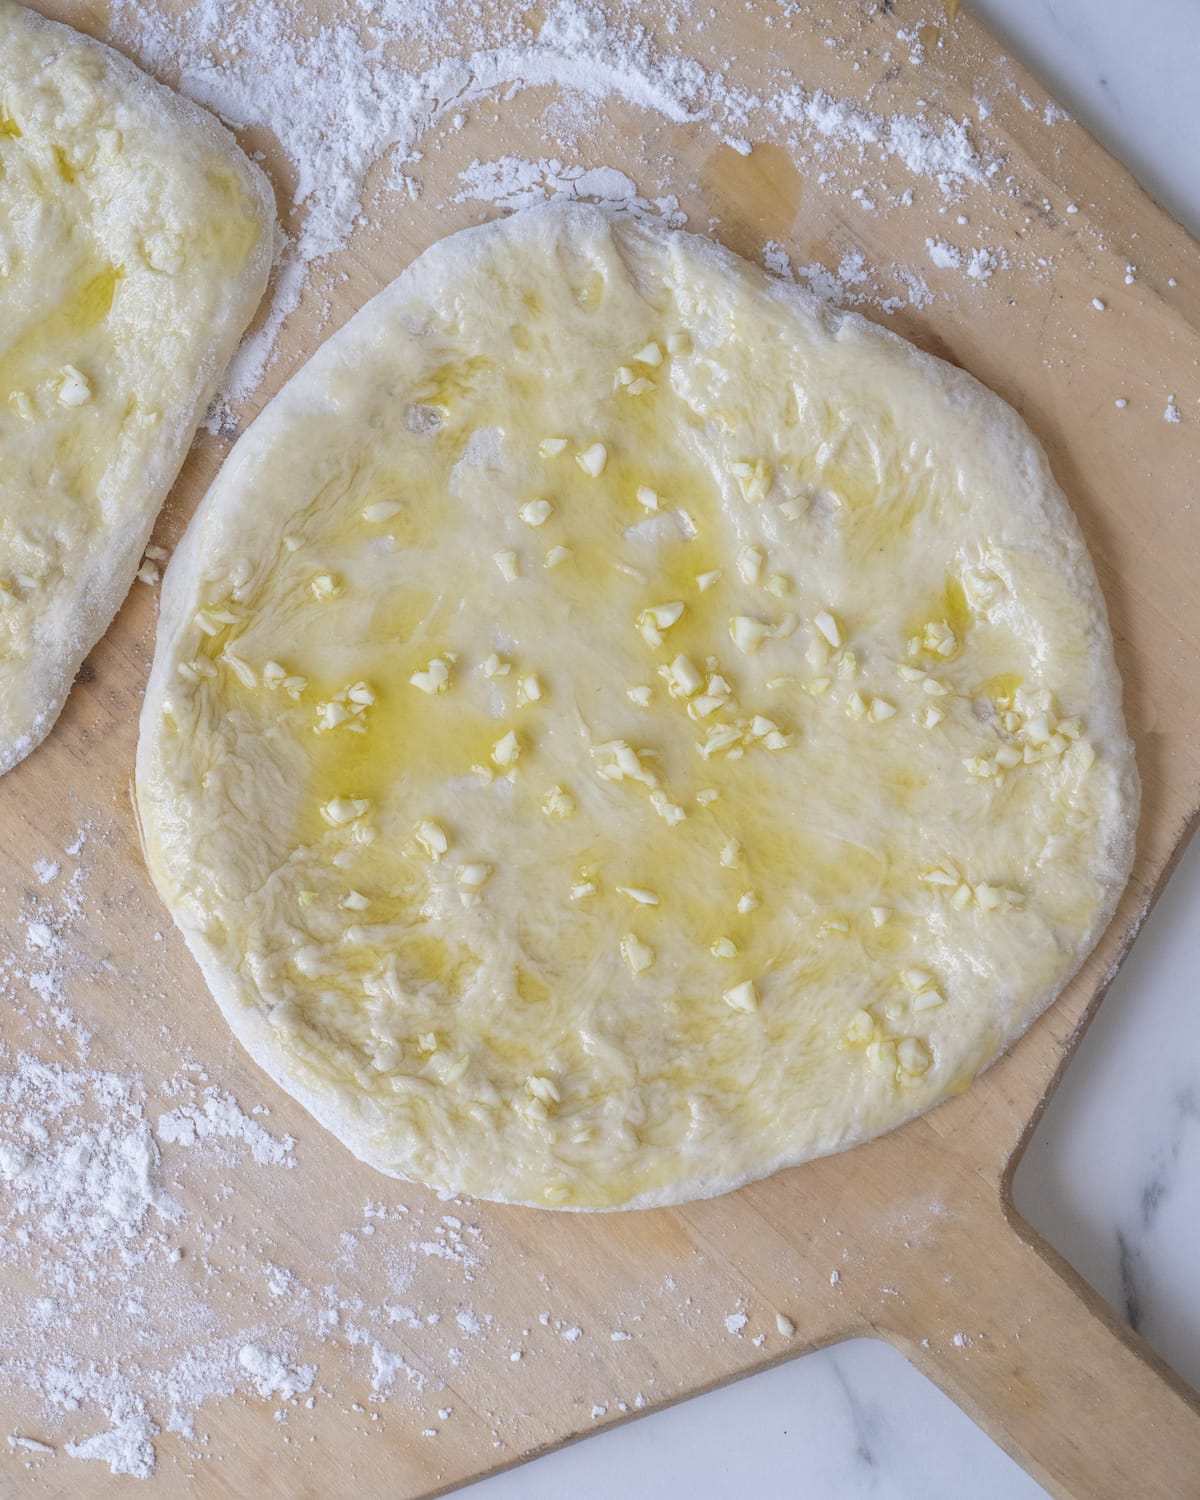 Rolled and shaped pizza dough divided into two pieces topped with olive oil and finely chopped garlic on a wooden pizza peel sprinkled with flour